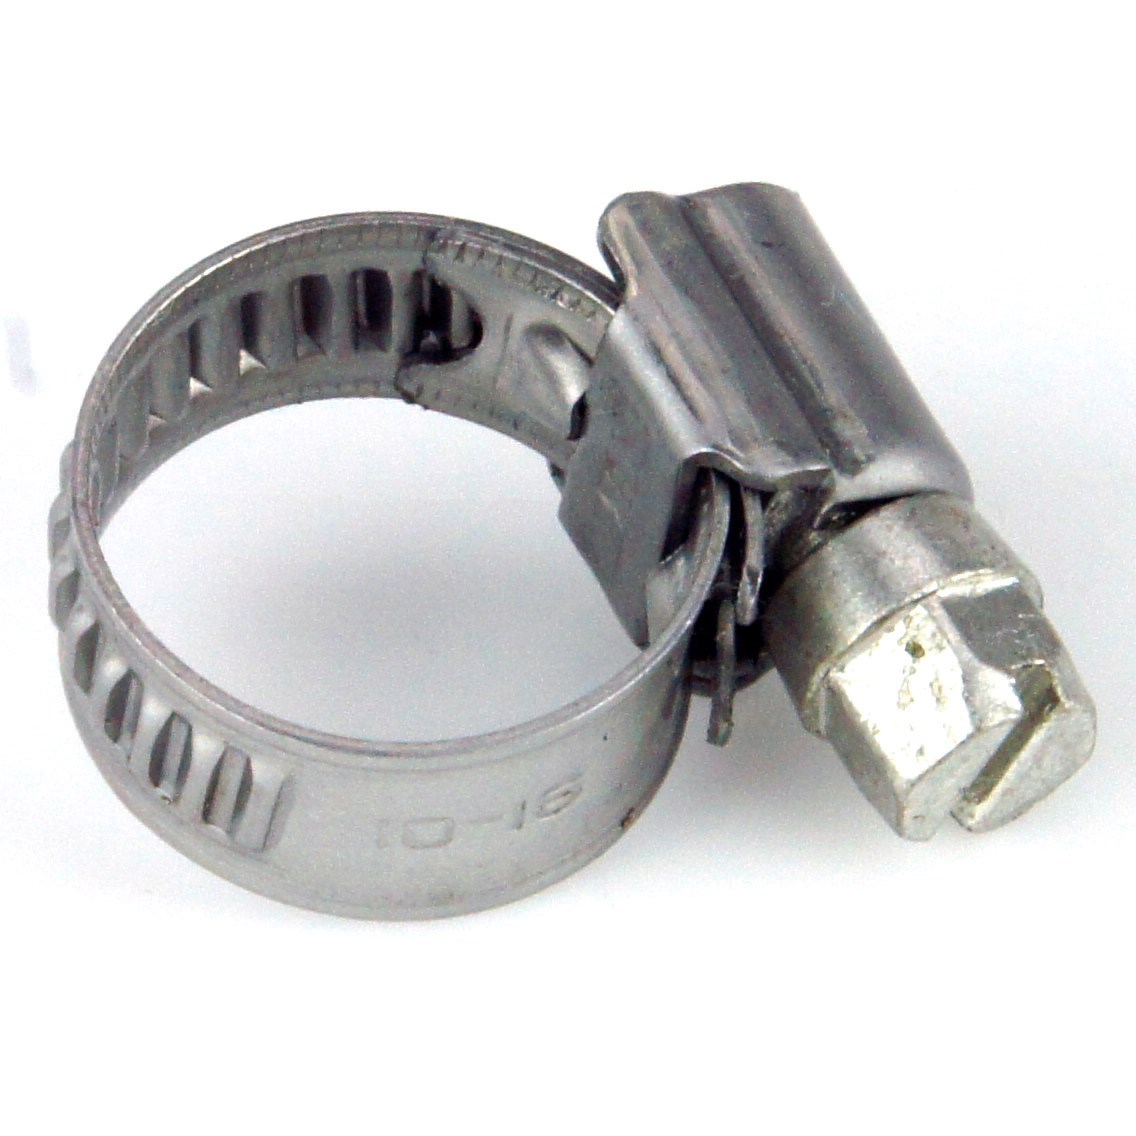 10-16mm-narrow-band-stainless-steel-hose-clip-sold-singly